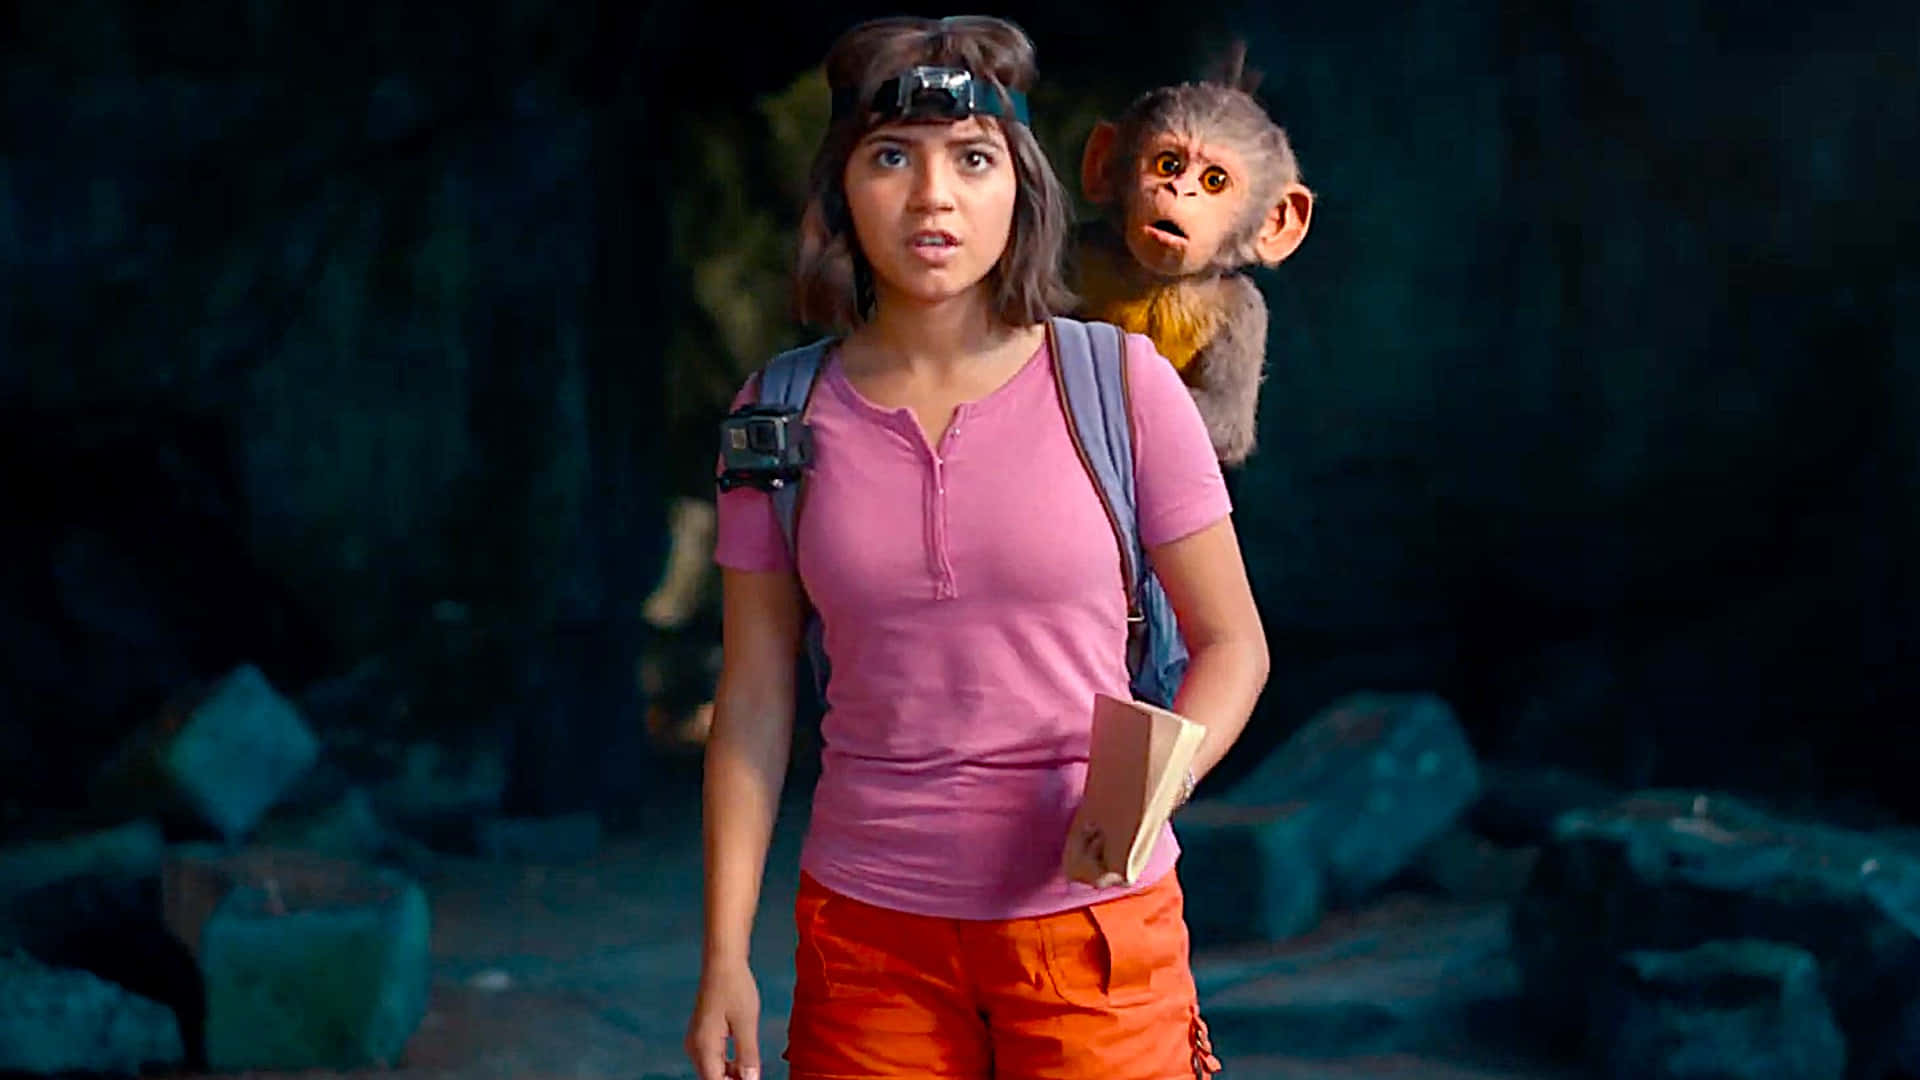 A Woman In Pink Shirt Is Holding A Monkey Wallpaper